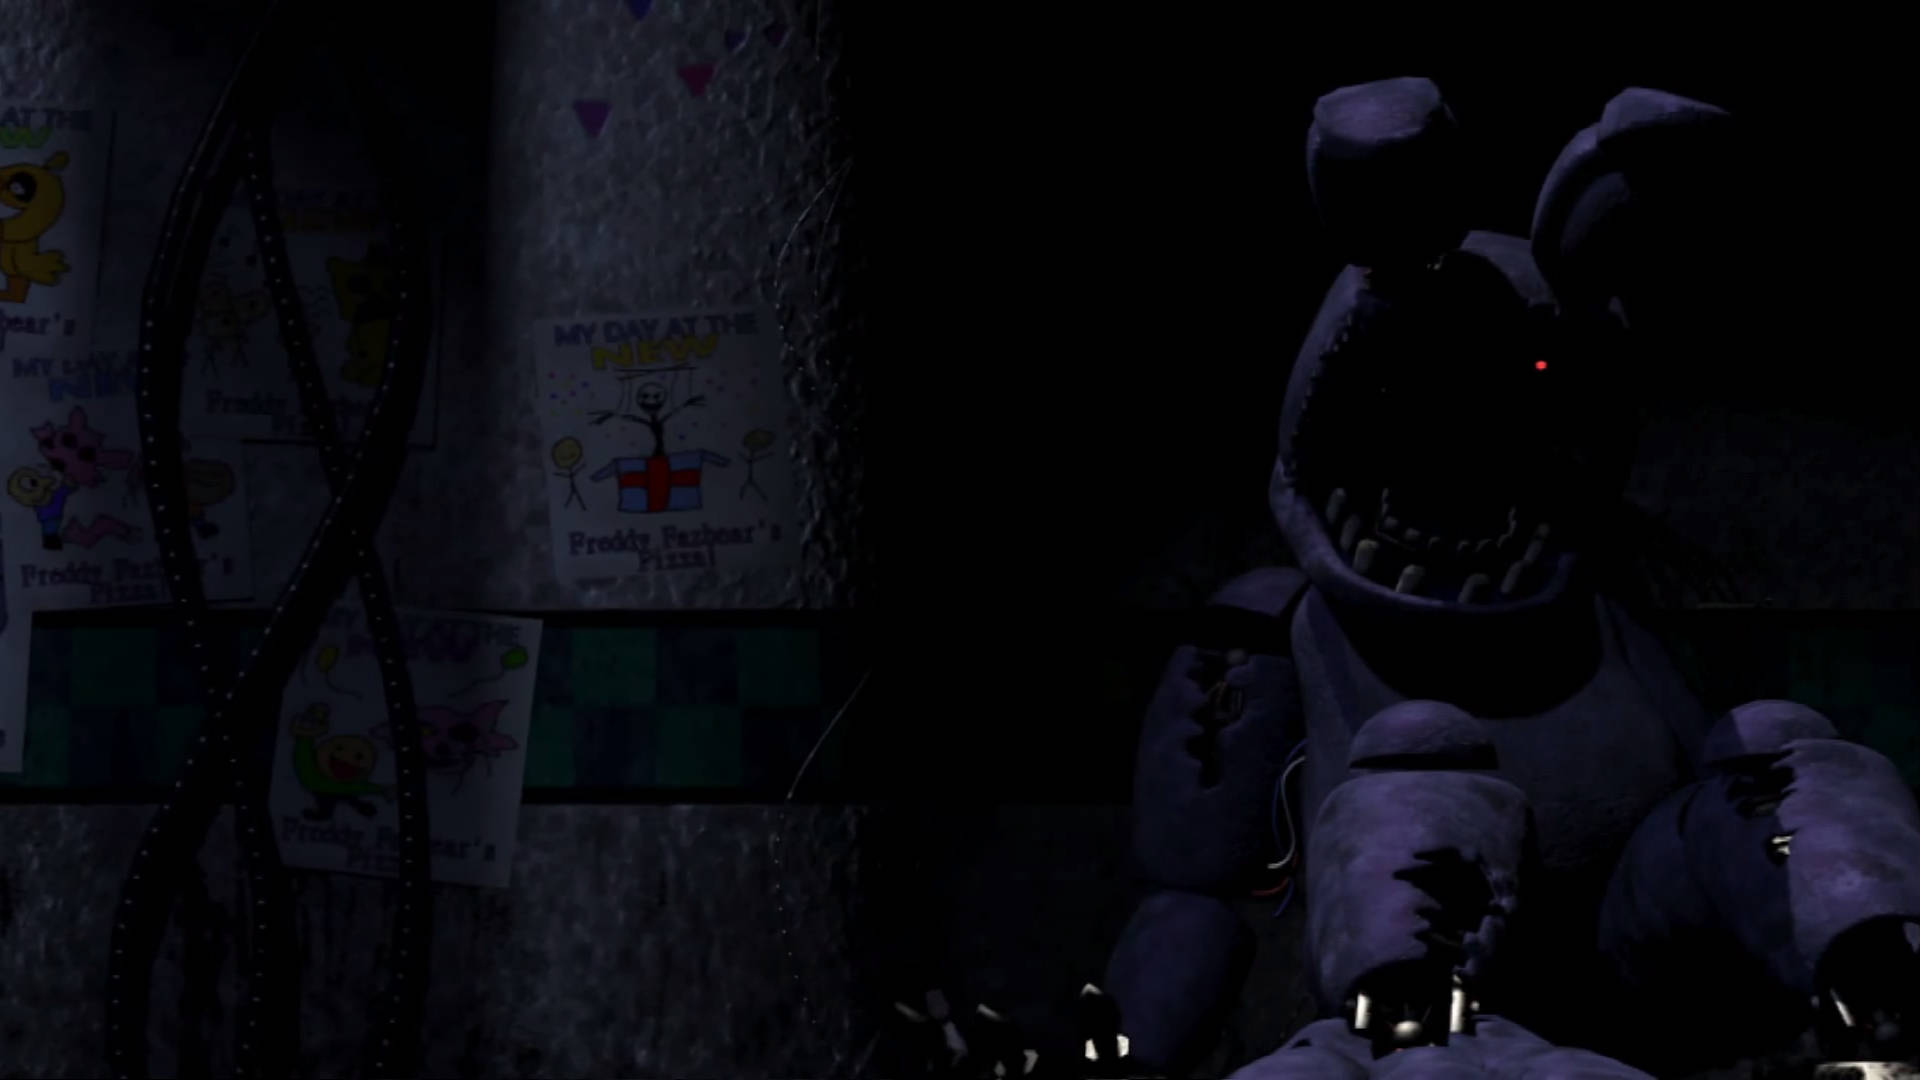 Nightmare Withered Bonnie, a Character from Five Nights at Freddy's Wallpaper